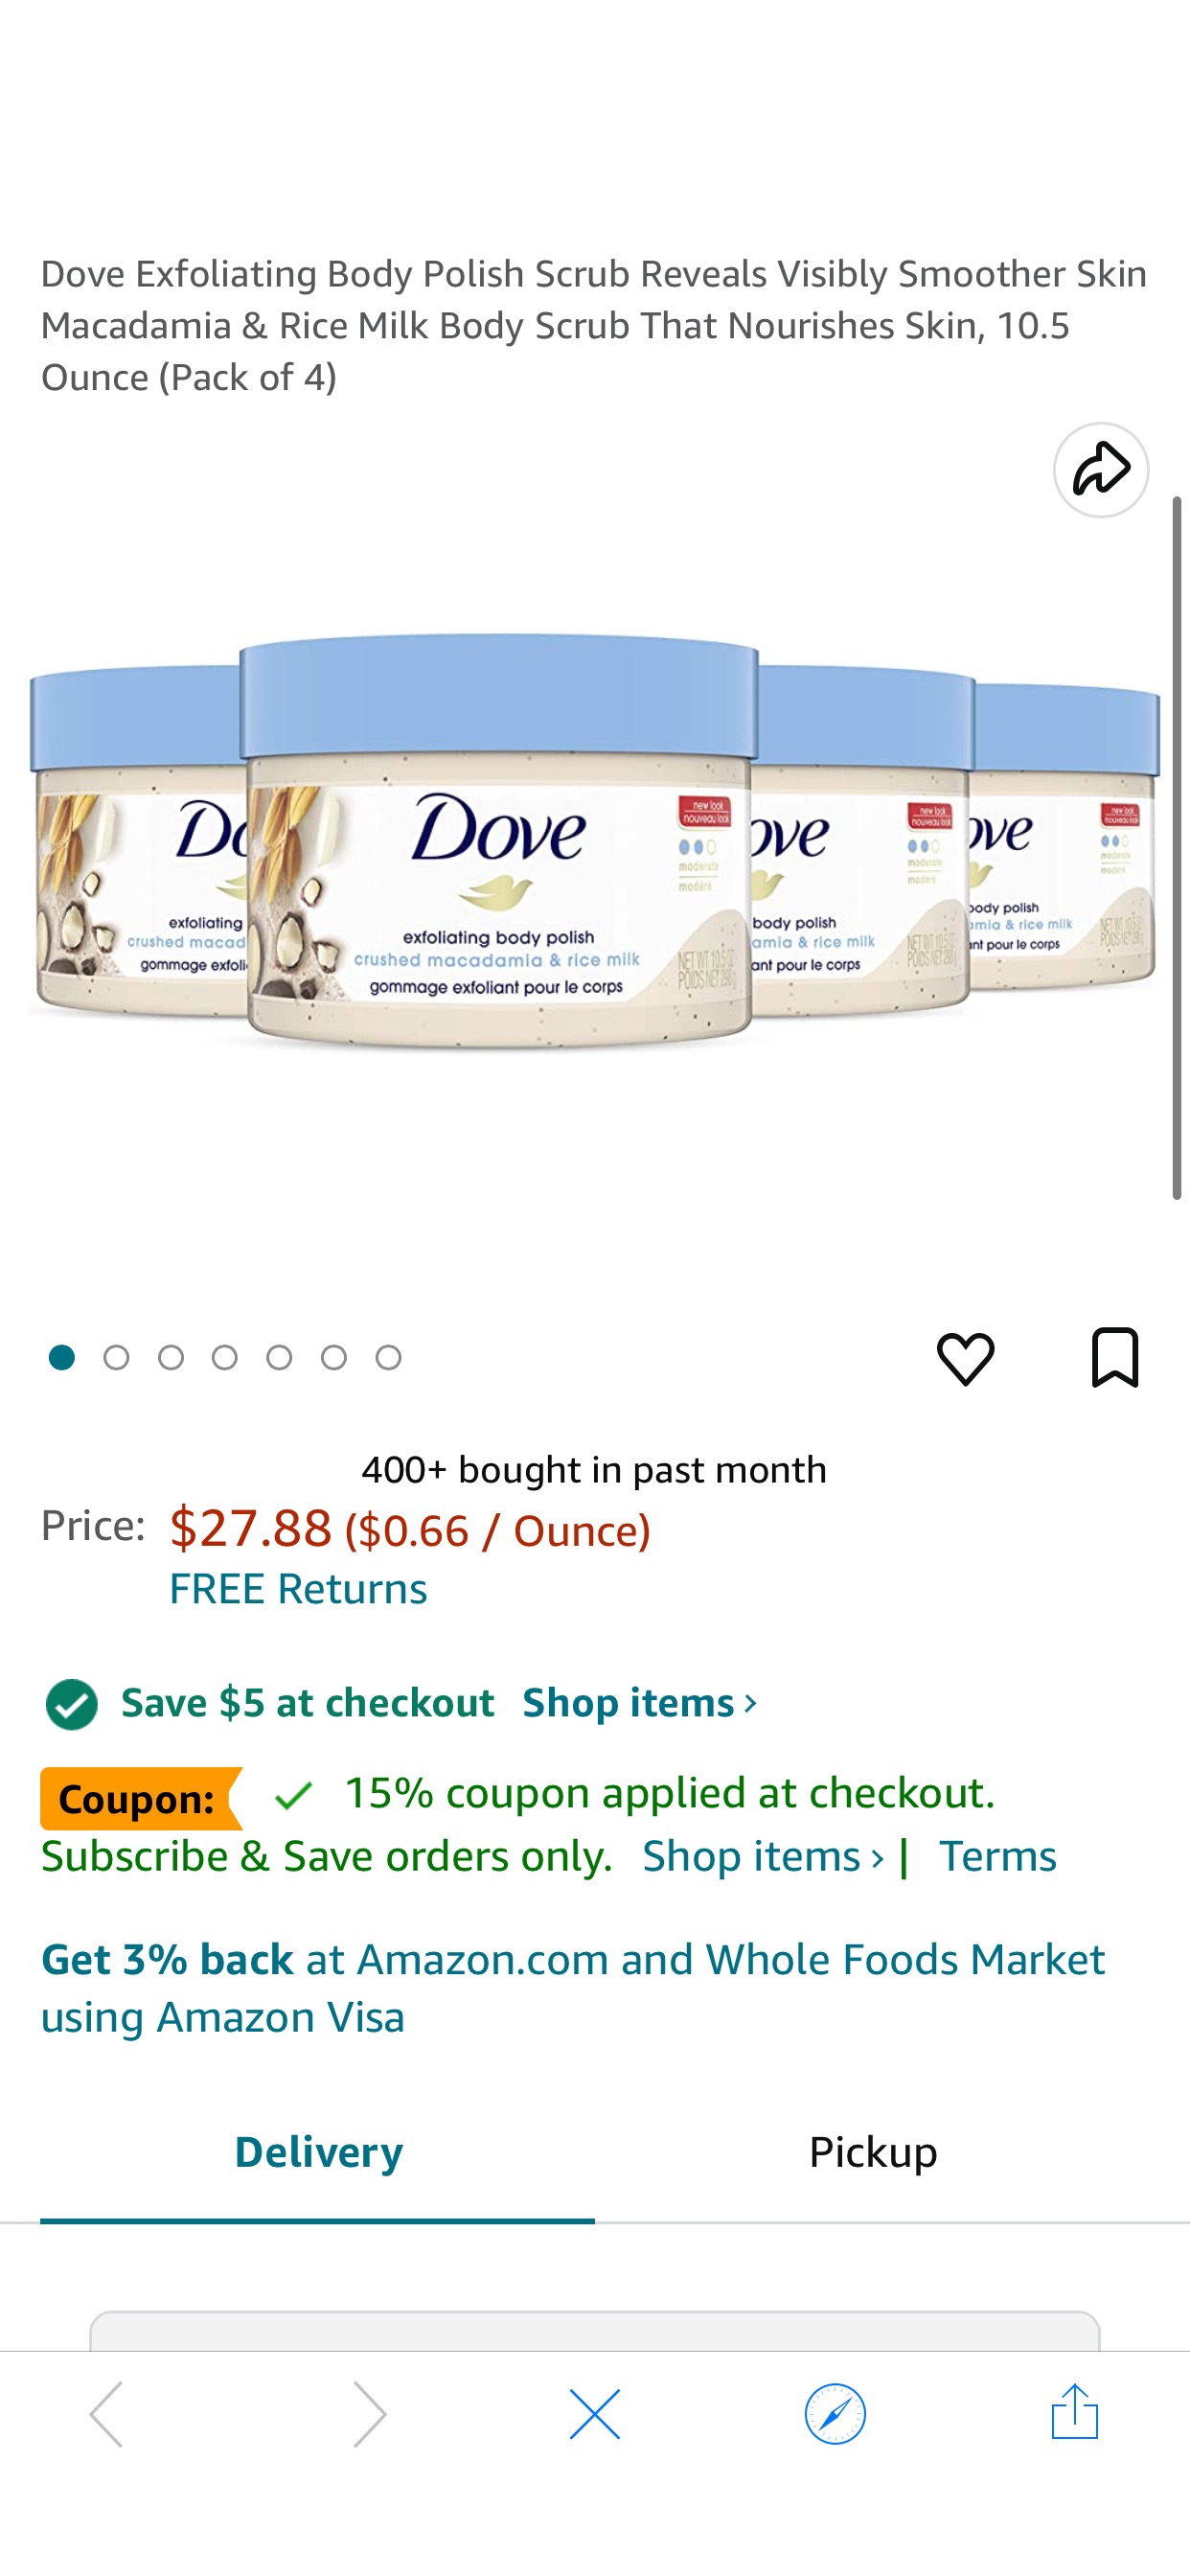 Amazon.com : Dove Exfoliating Body Polish Scrub Reveals Visibly Smoother Skin Macadamia & Rice Milk Body Scrub That Nourishes Skin, 10.5 Ounce (Pack of 4) : Beauty & Personal Care